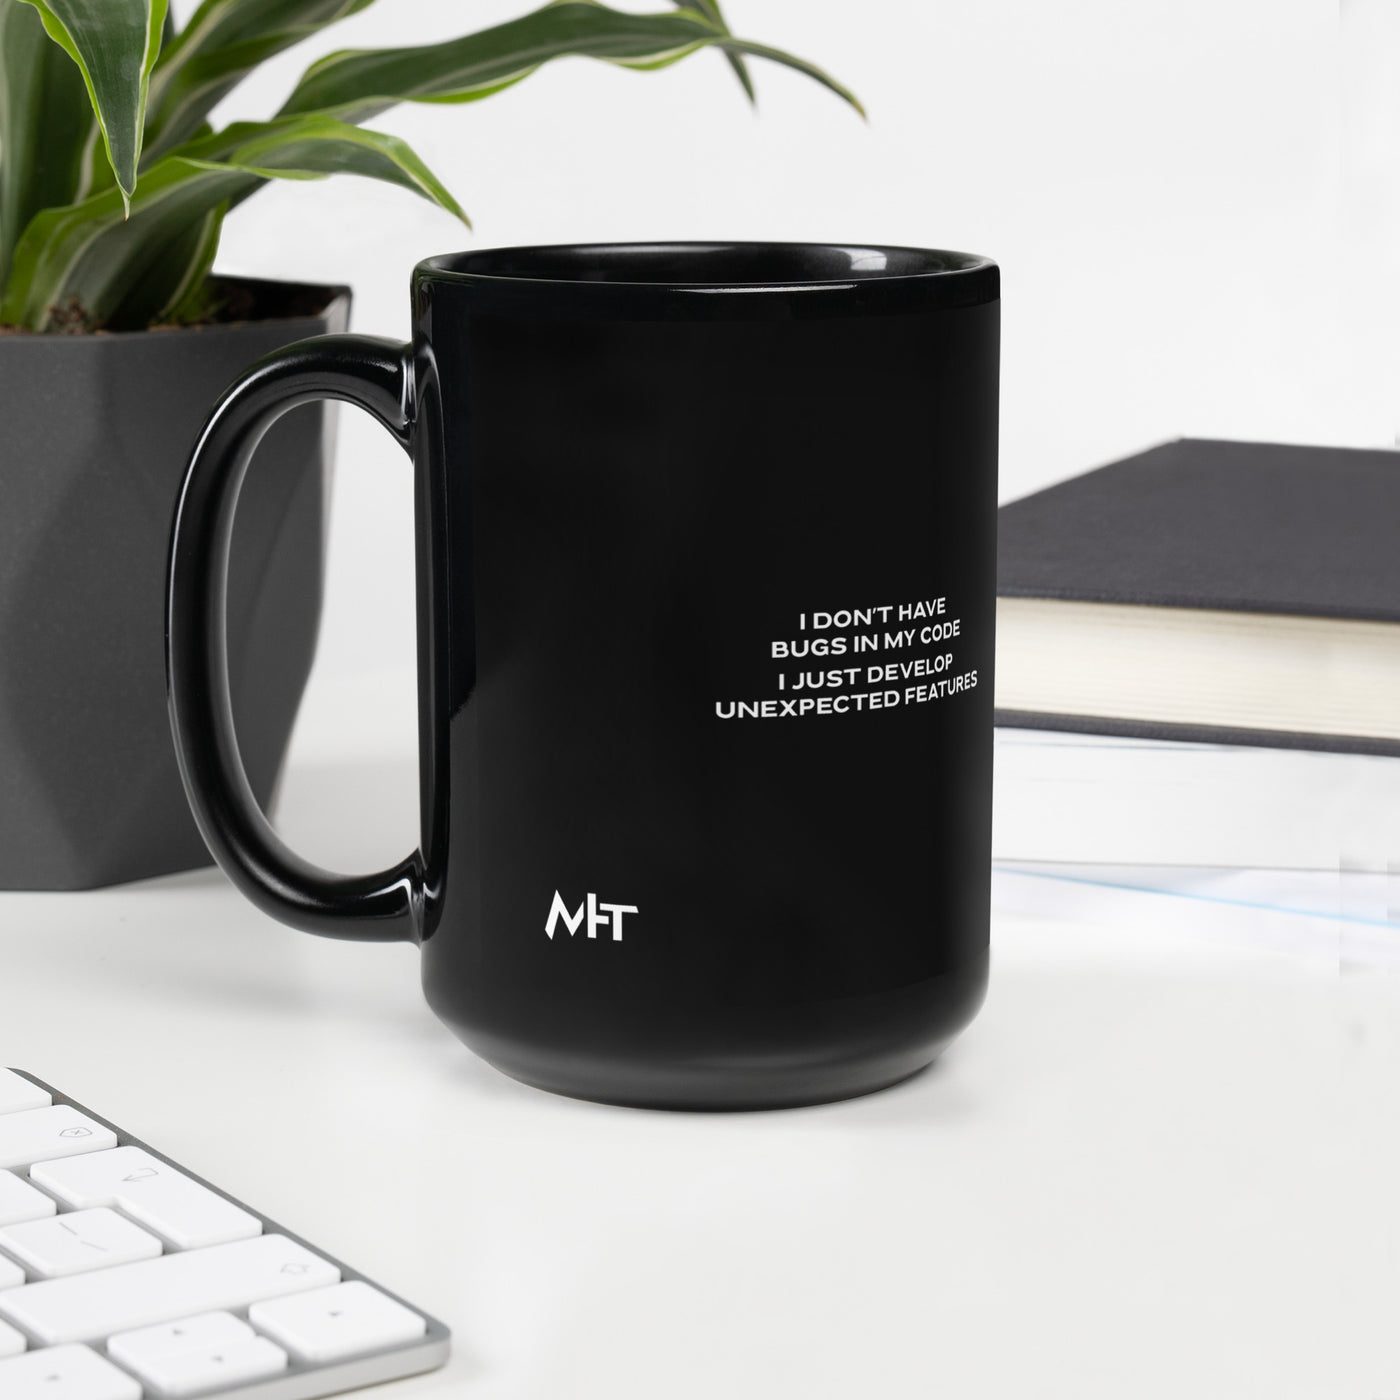 I don't Have bugs in my code, I just Develop unexpected features - Black Glossy Mug